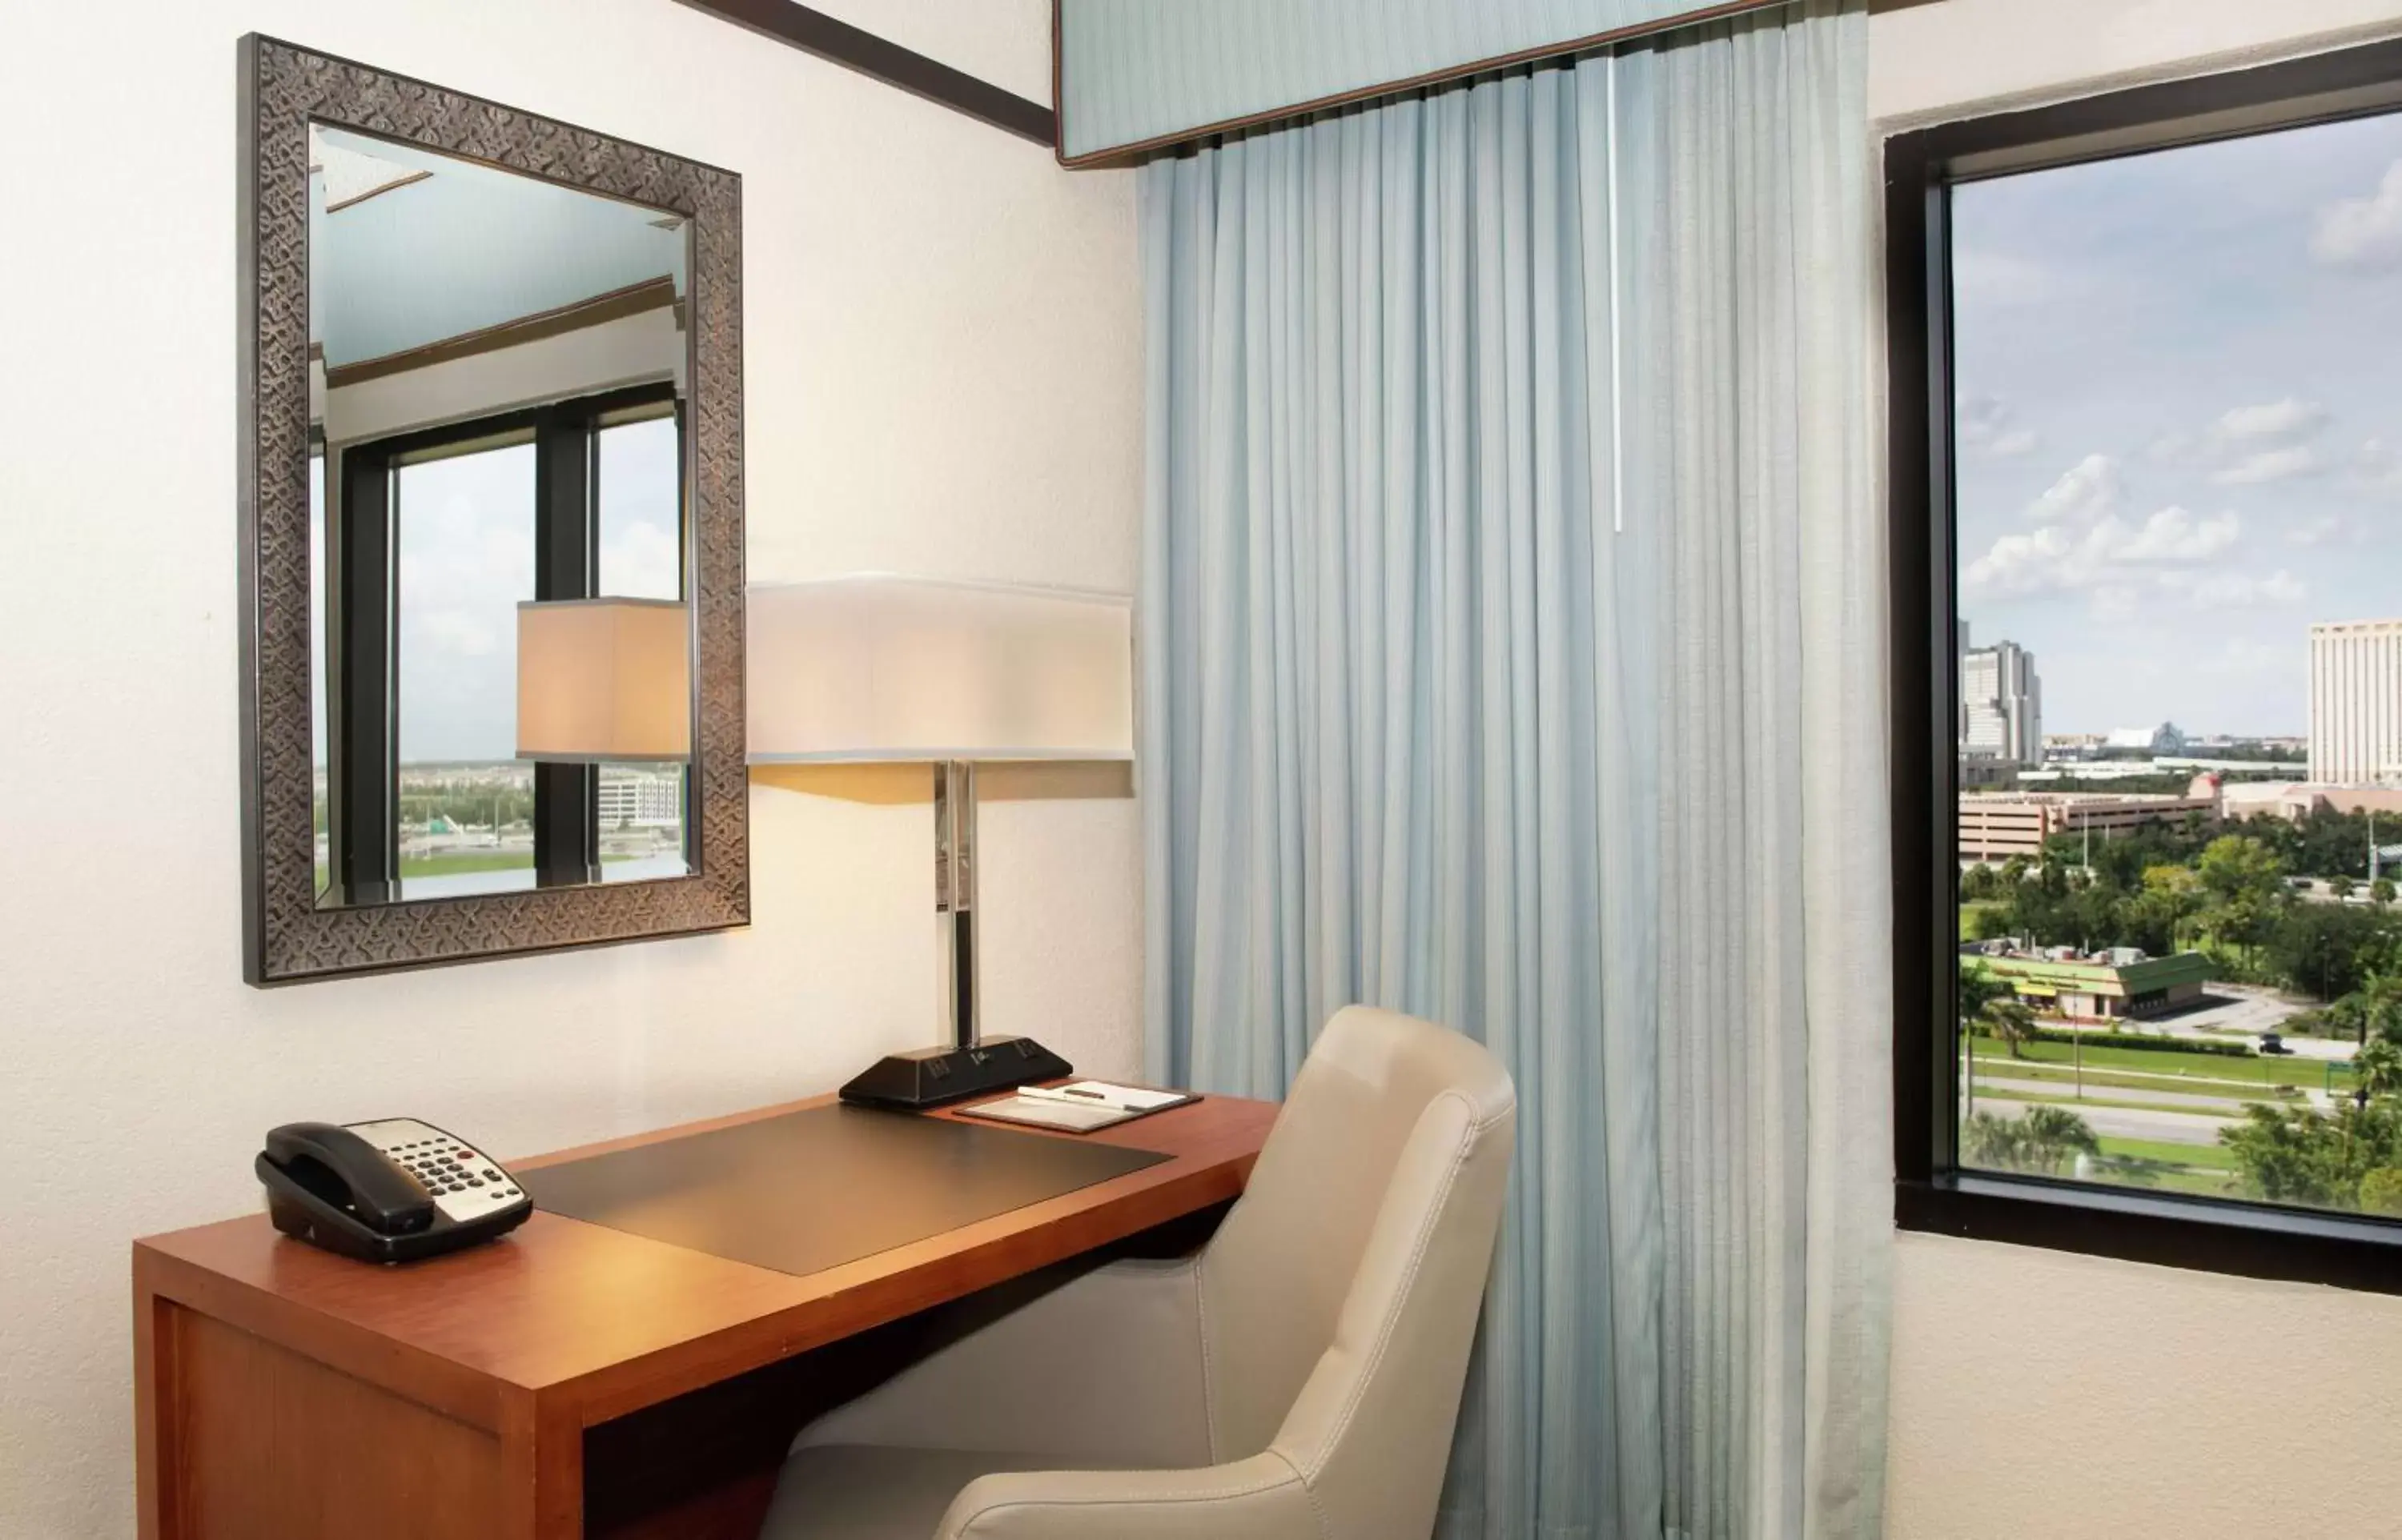 Bedroom in DoubleTree by Hilton Hotel Orlando at SeaWorld